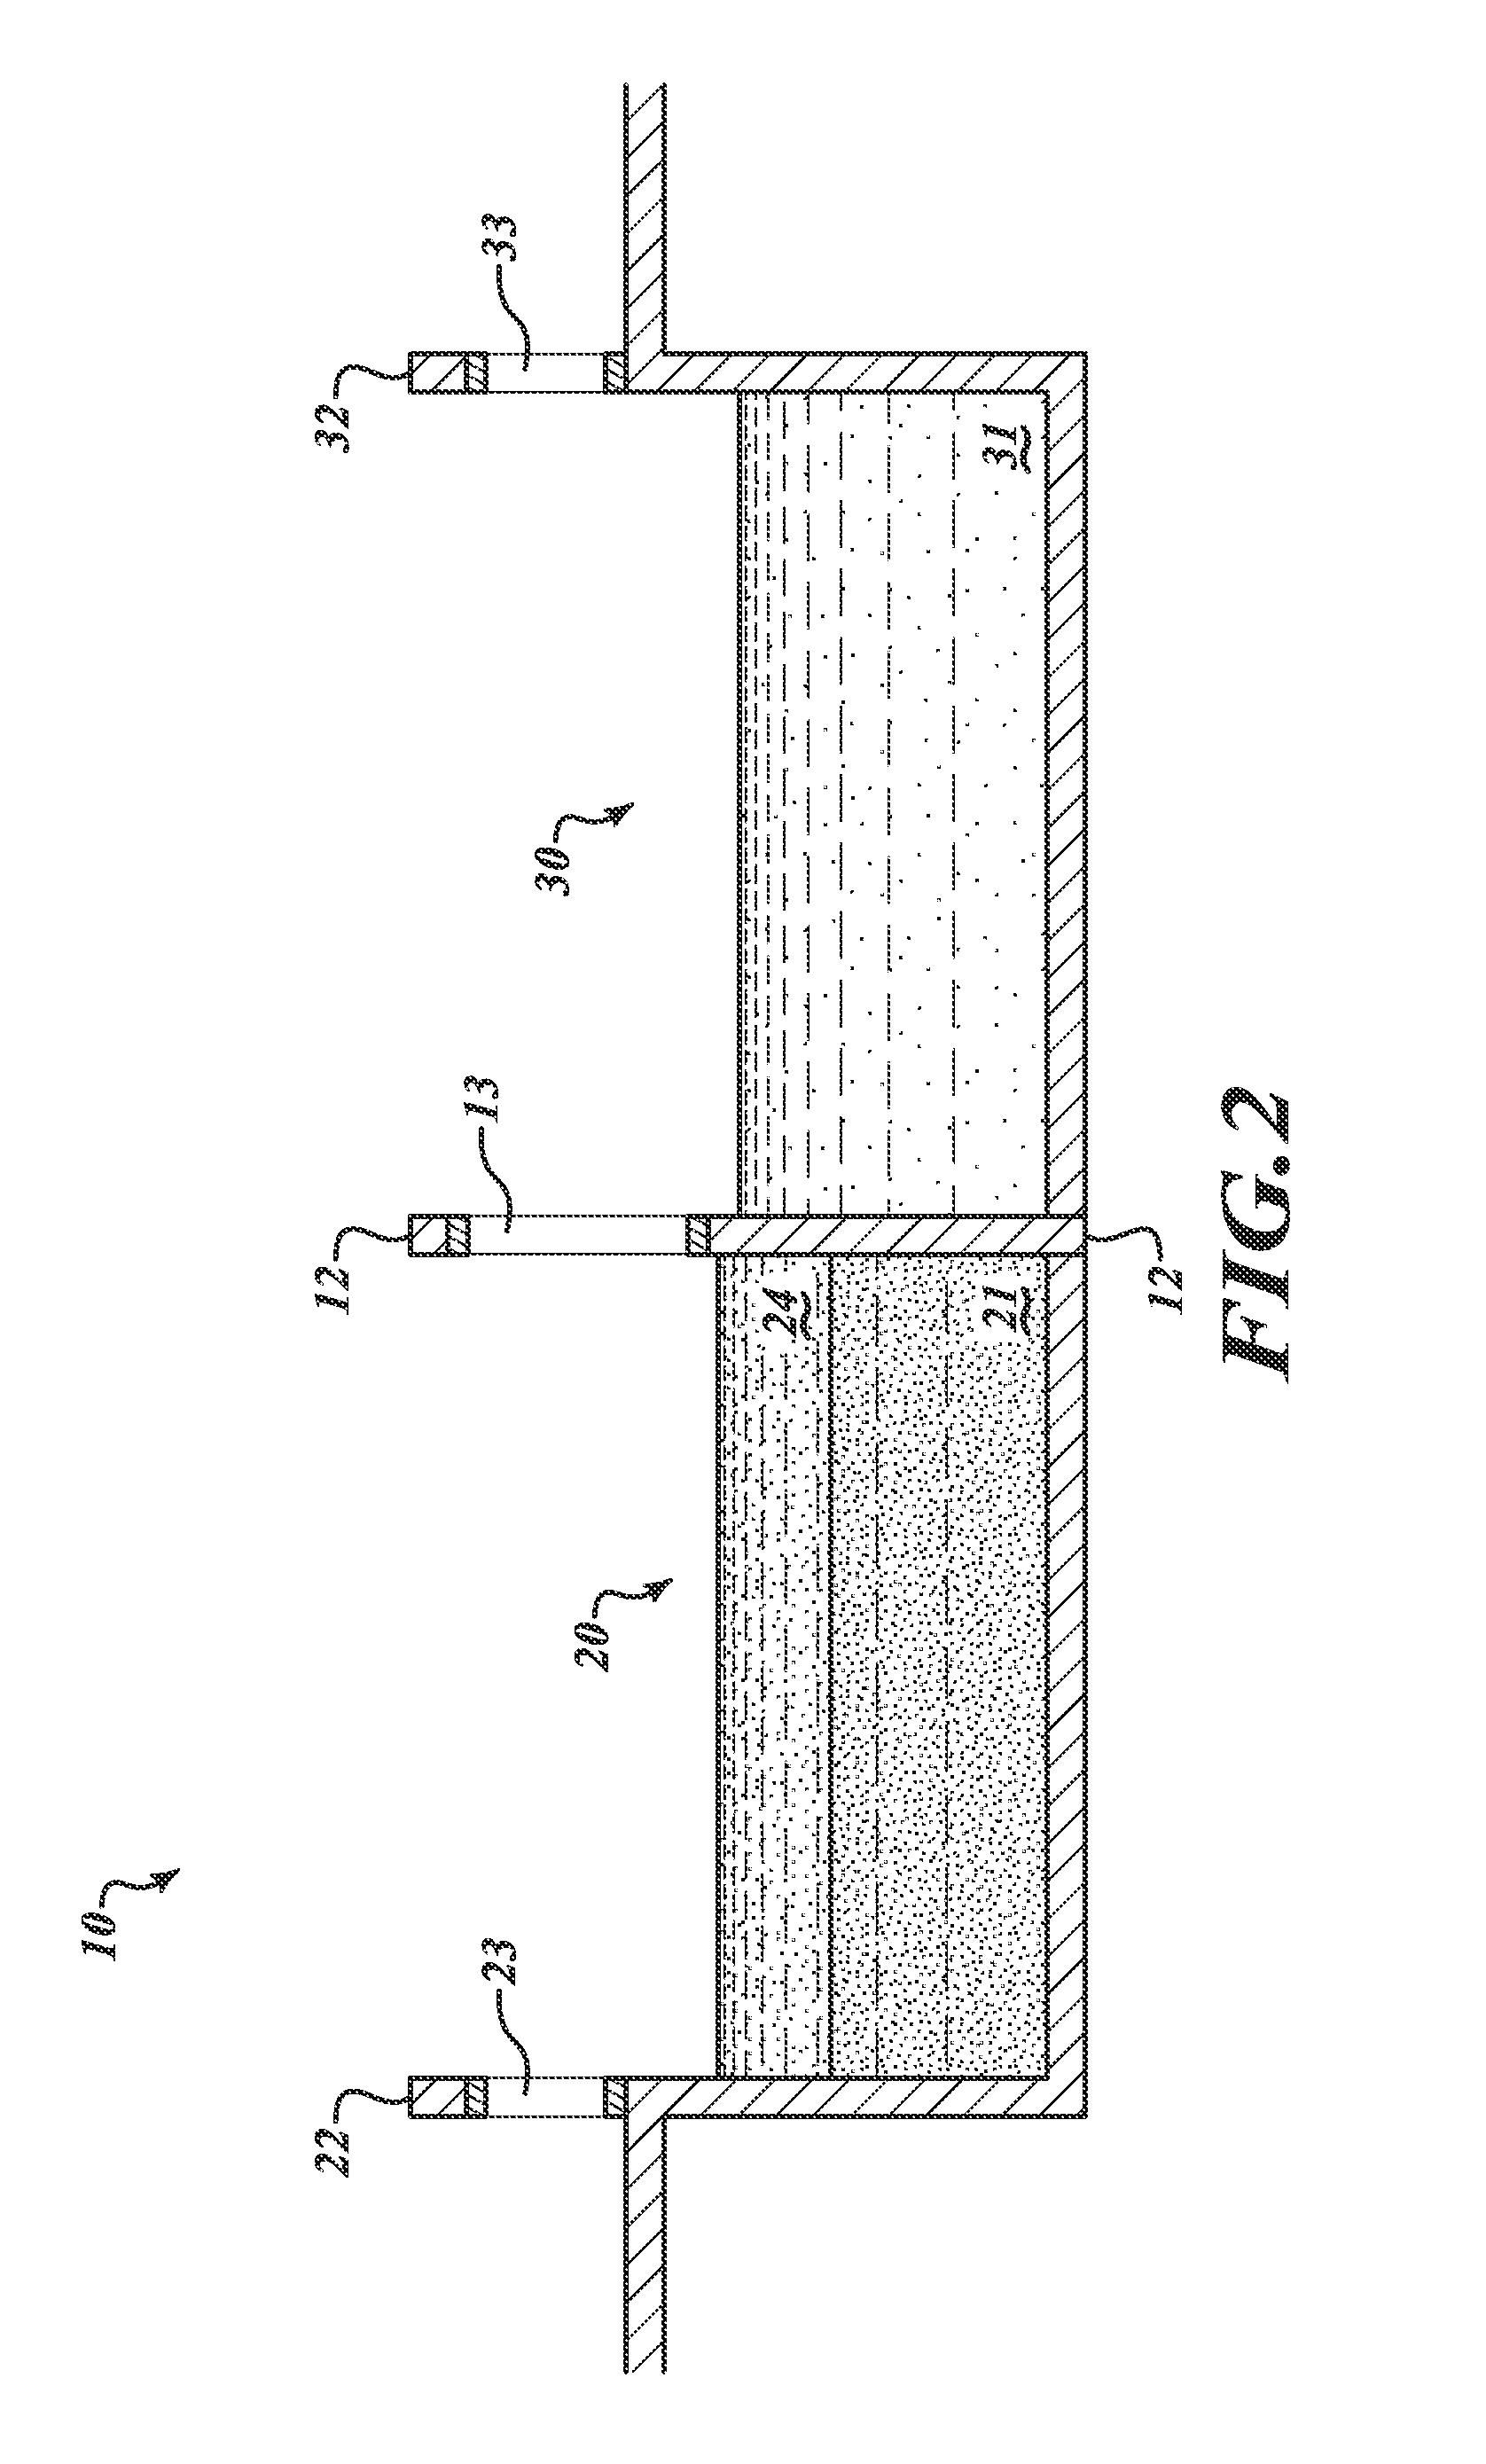 Two-tank wiered reservoir and method of use